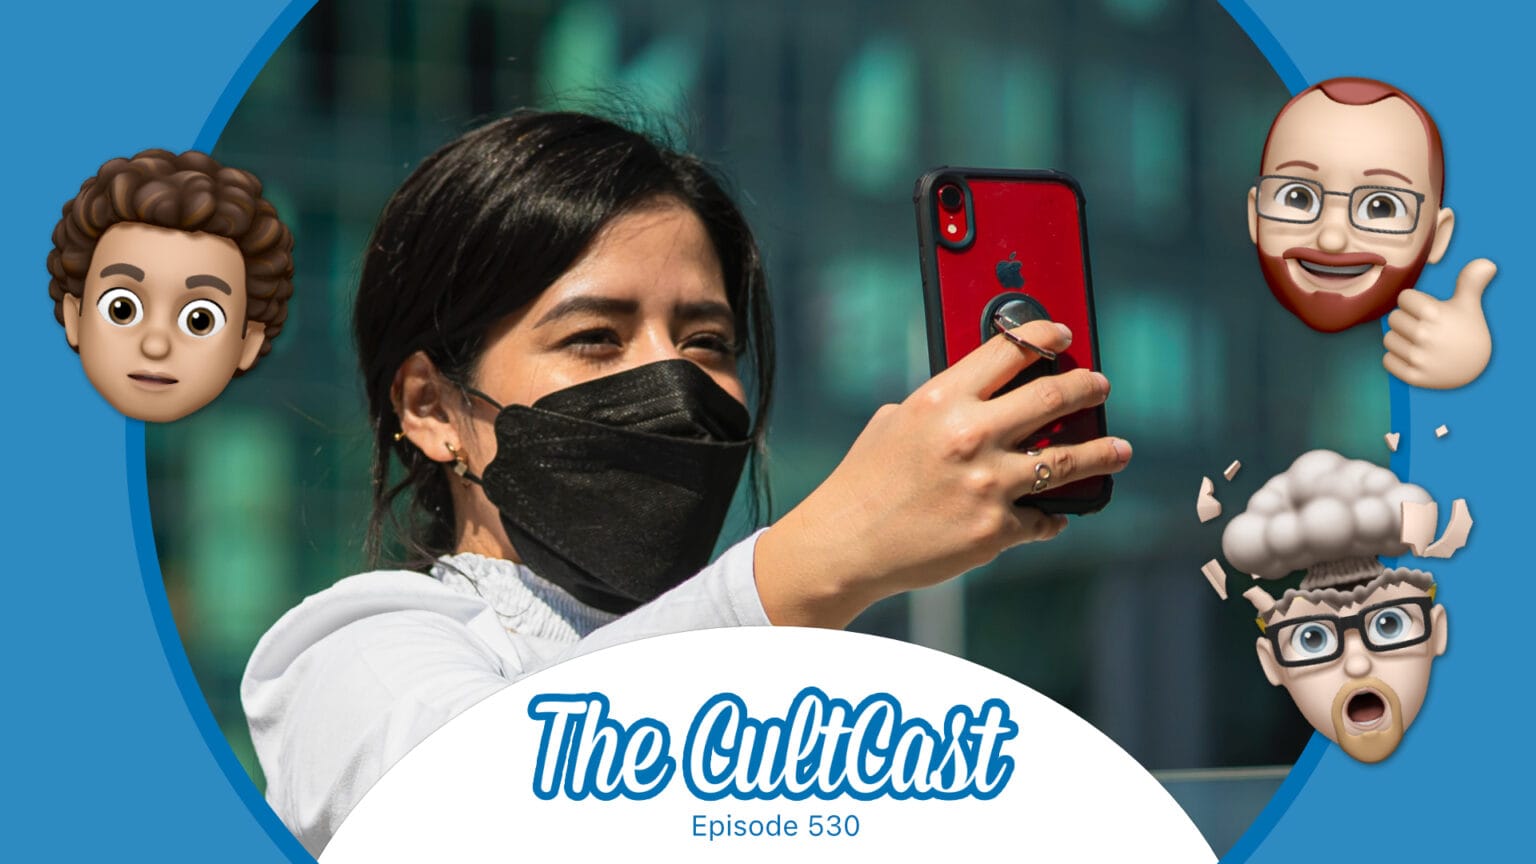 The CultCast: Face ID might play nice with masks in the near future. Better late than never!